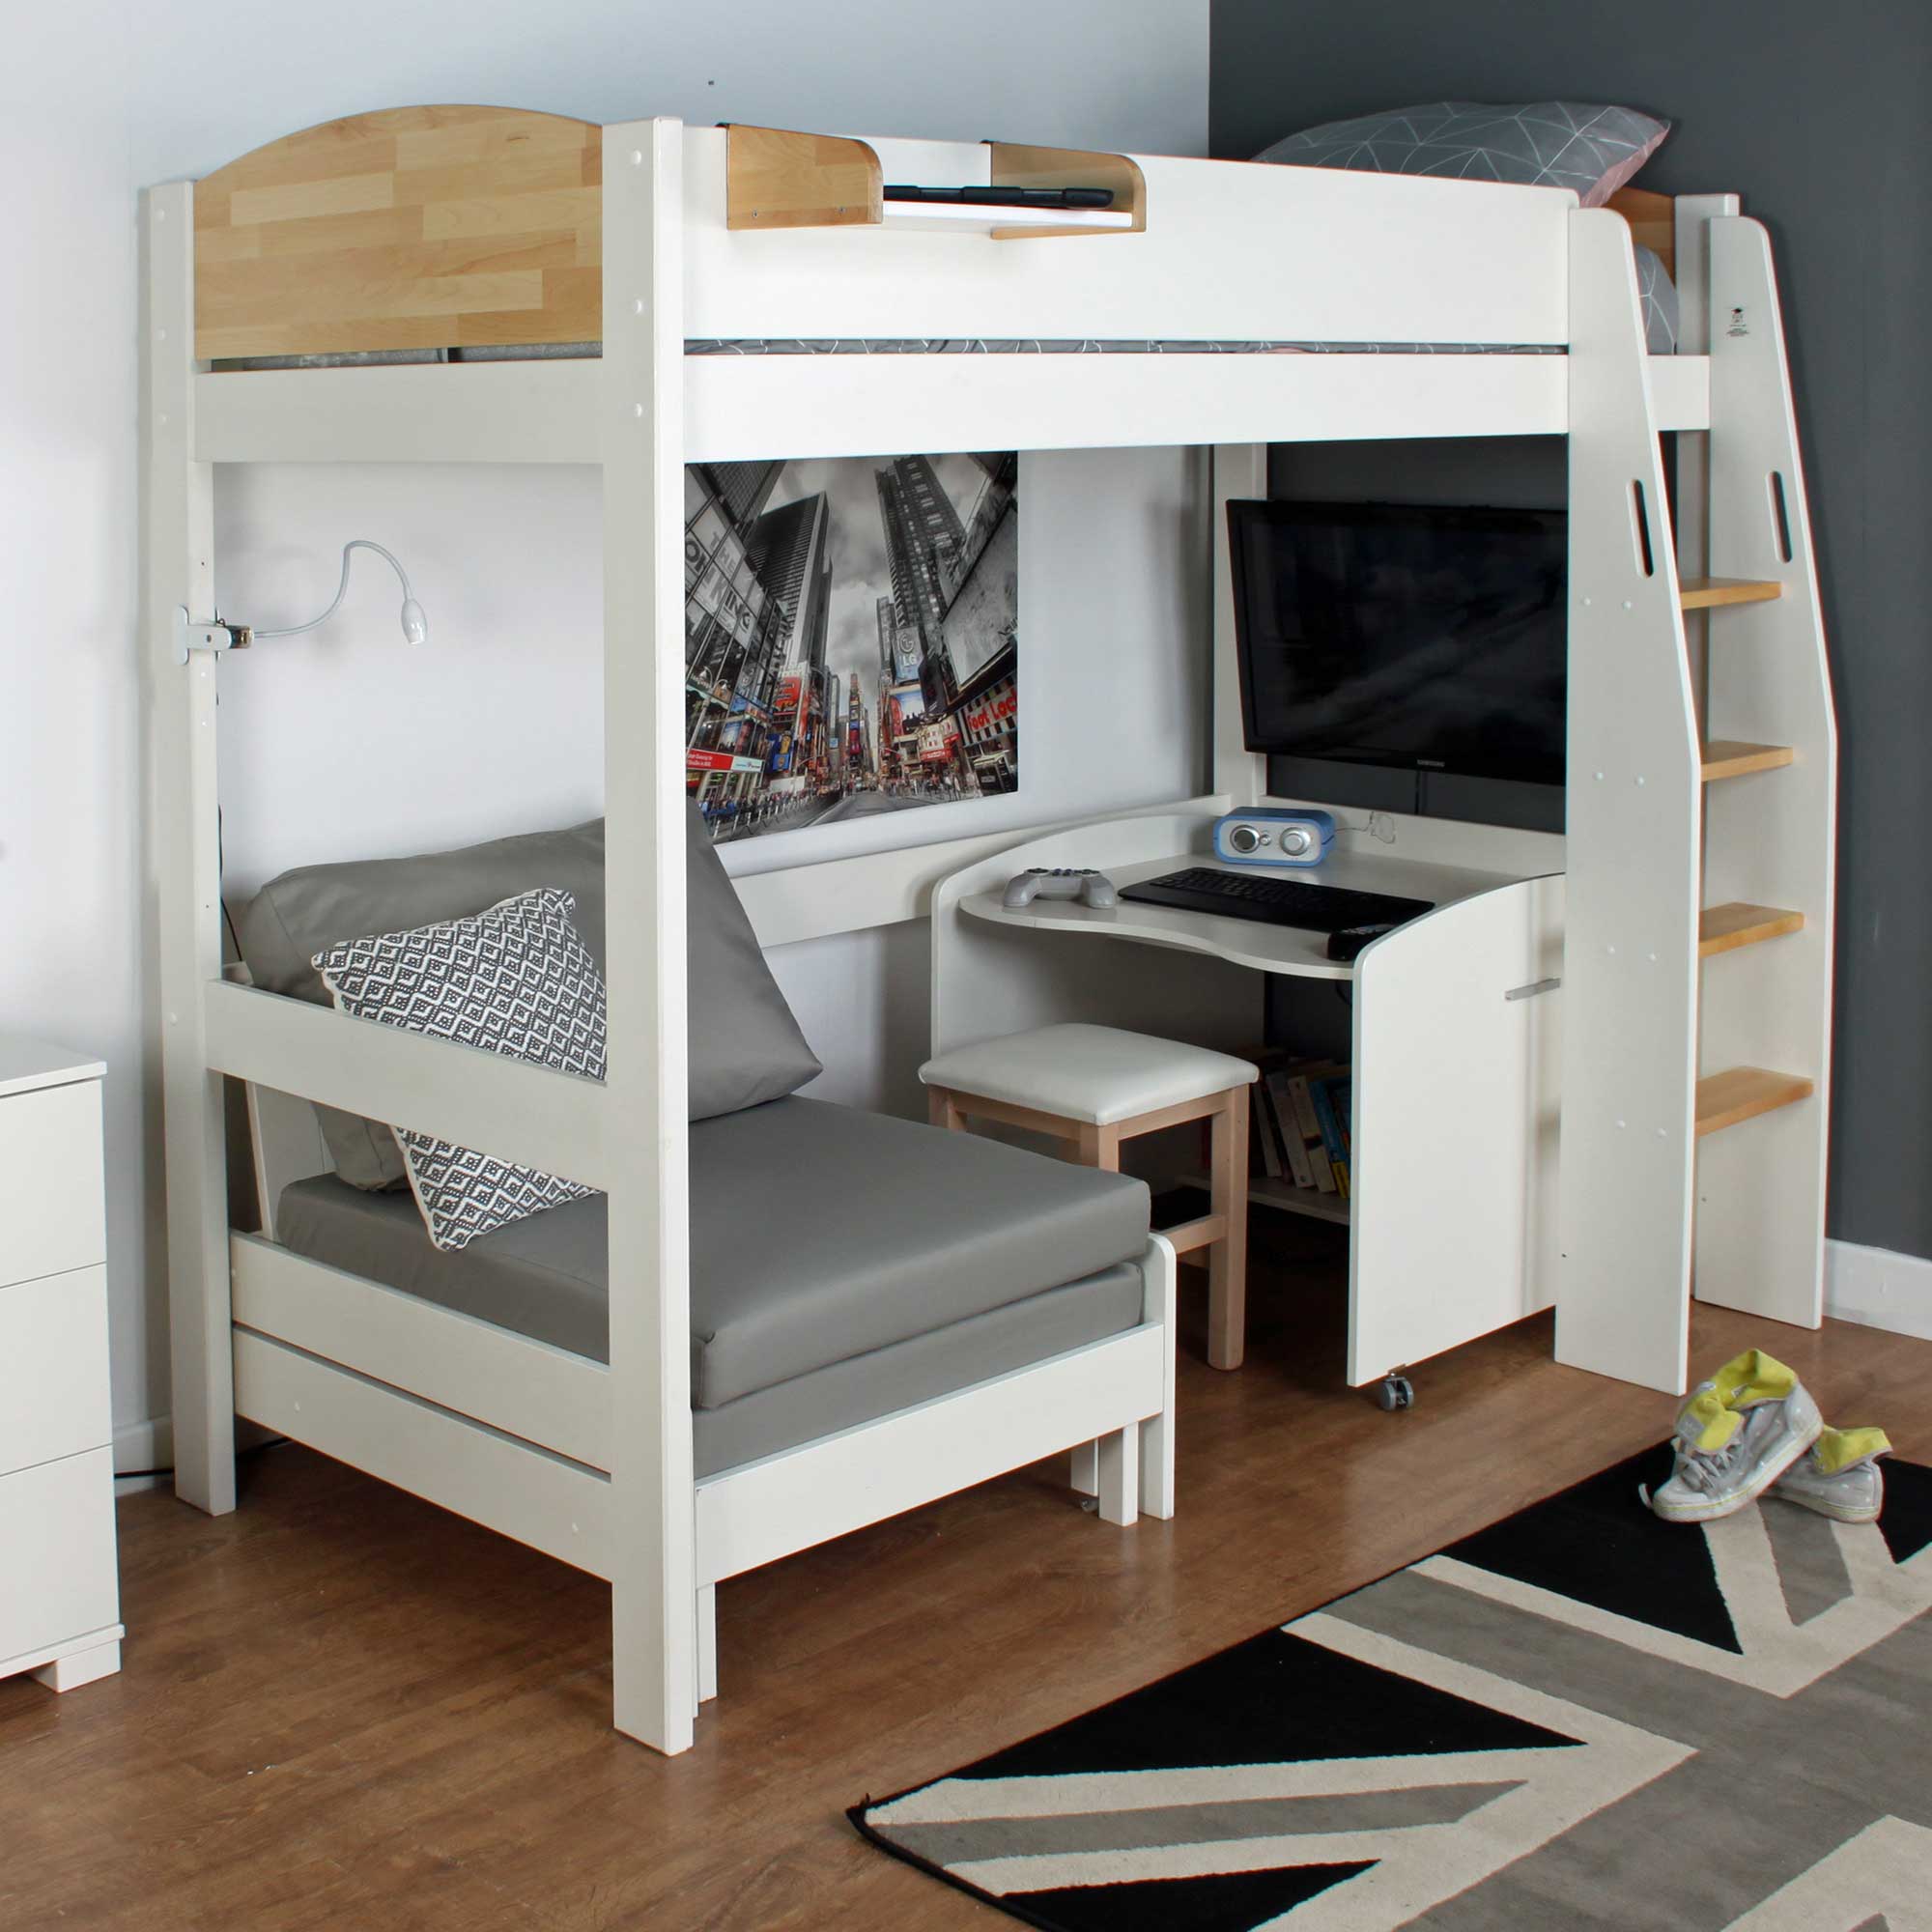 Bunk Bed With Desk And Sofa Off 75, Futon Desk Bunk Bed